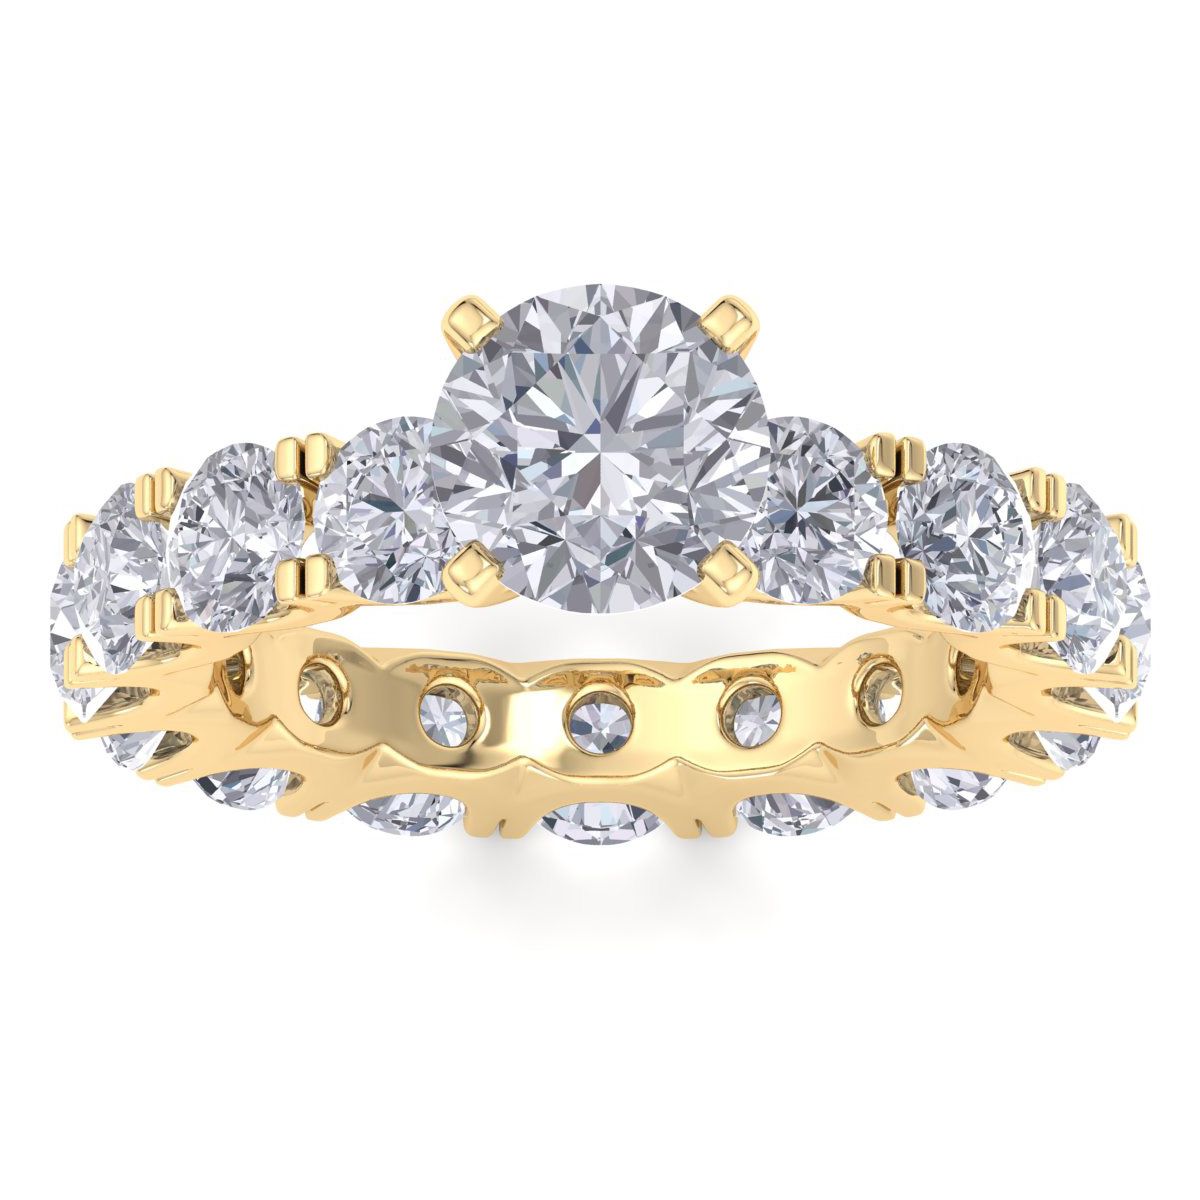 Sselects 14 Karat Yellow Gold 5 1/2 Carat Lab Grown Diamond Eternity Engagement Ring With 1 1/2 Carat Round B In Gray